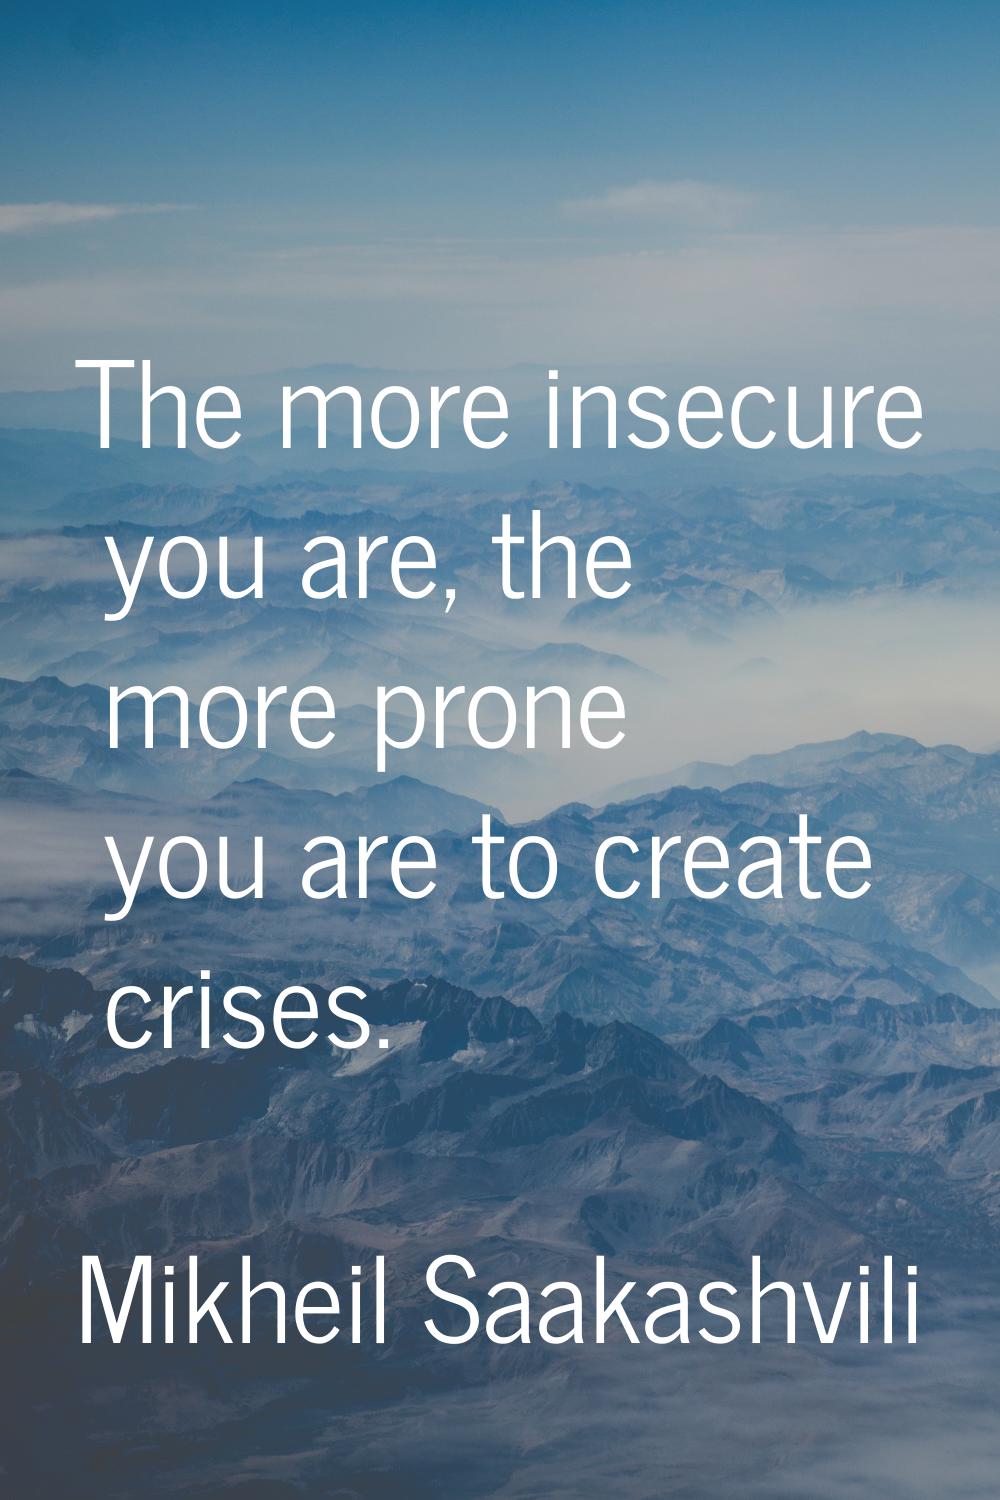 The more insecure you are, the more prone you are to create crises.